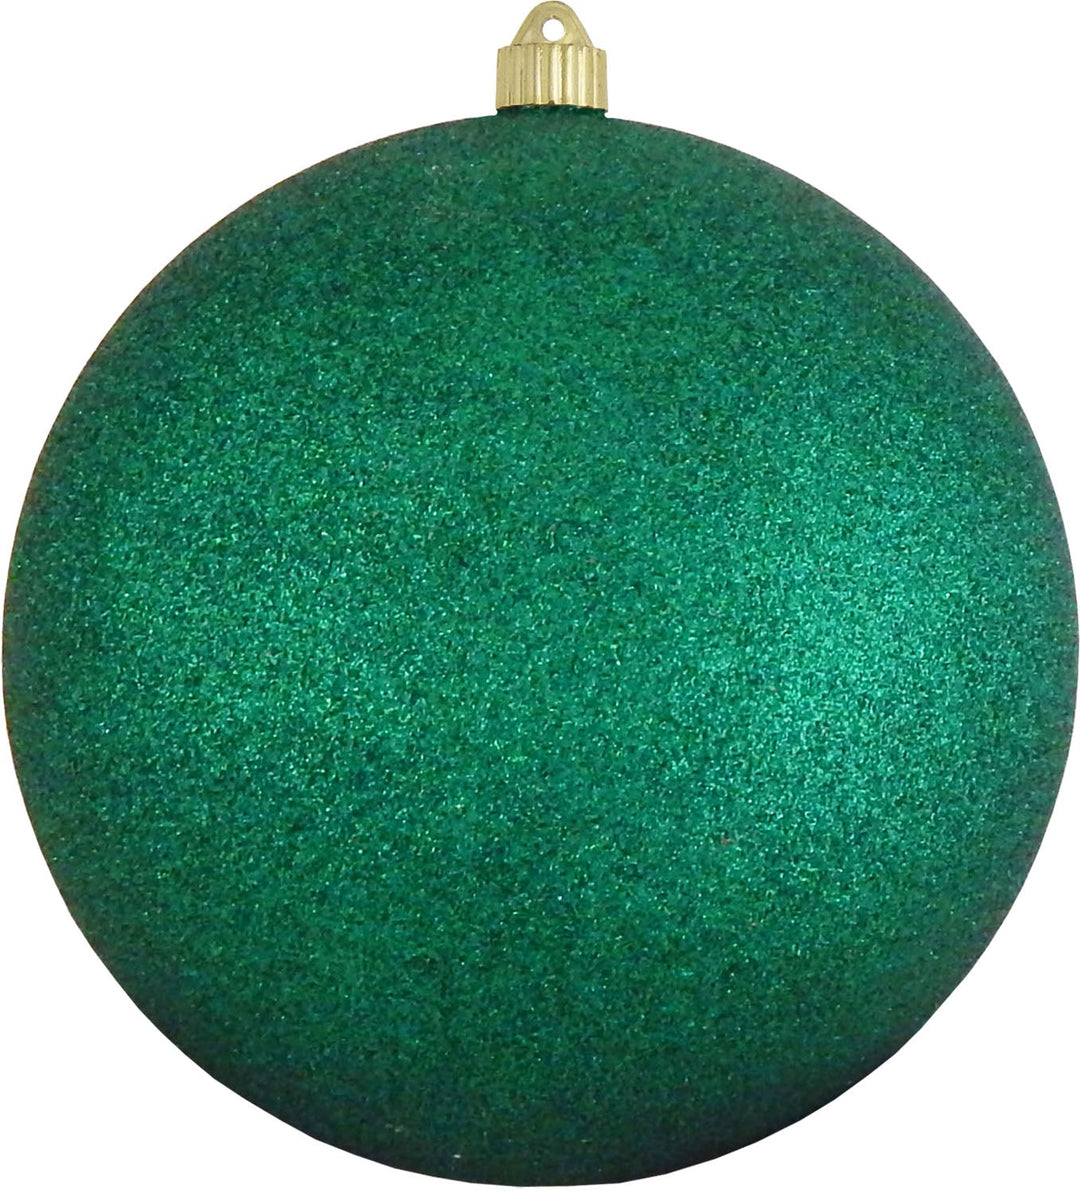 Christmas By Krebs 10" (250mm) Emerald Green Glitter [1 Piece] Solid Commercial Grade Indoor and Outdoor Shatterproof Plastic, Water Resistant Ball Ornament Decorations